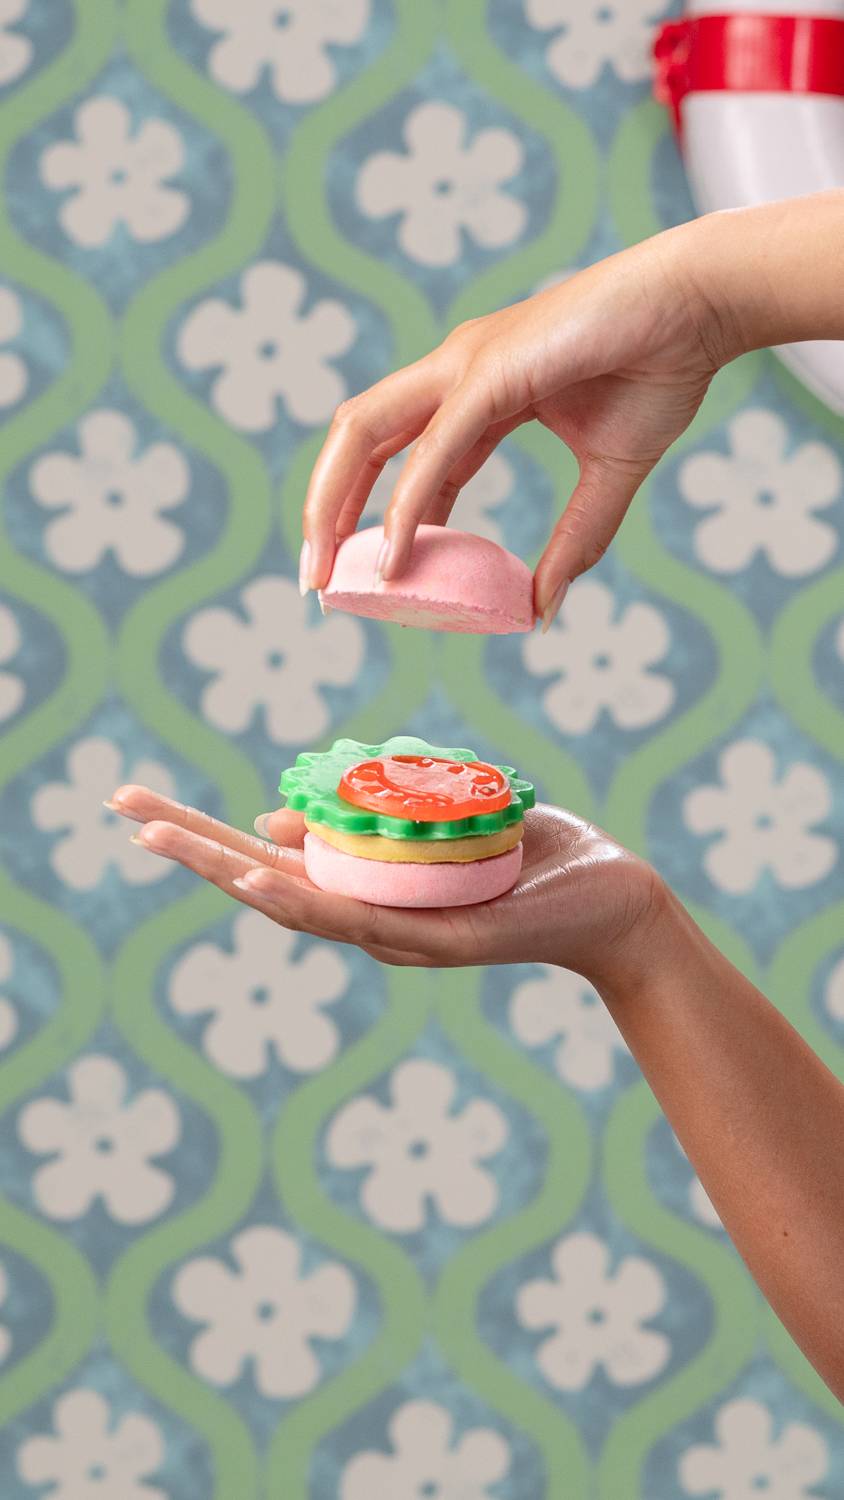 Model is holding the stacked burger-style Krabby Bathy gift in one hand, while the other is taking off the top bun bath bomb.